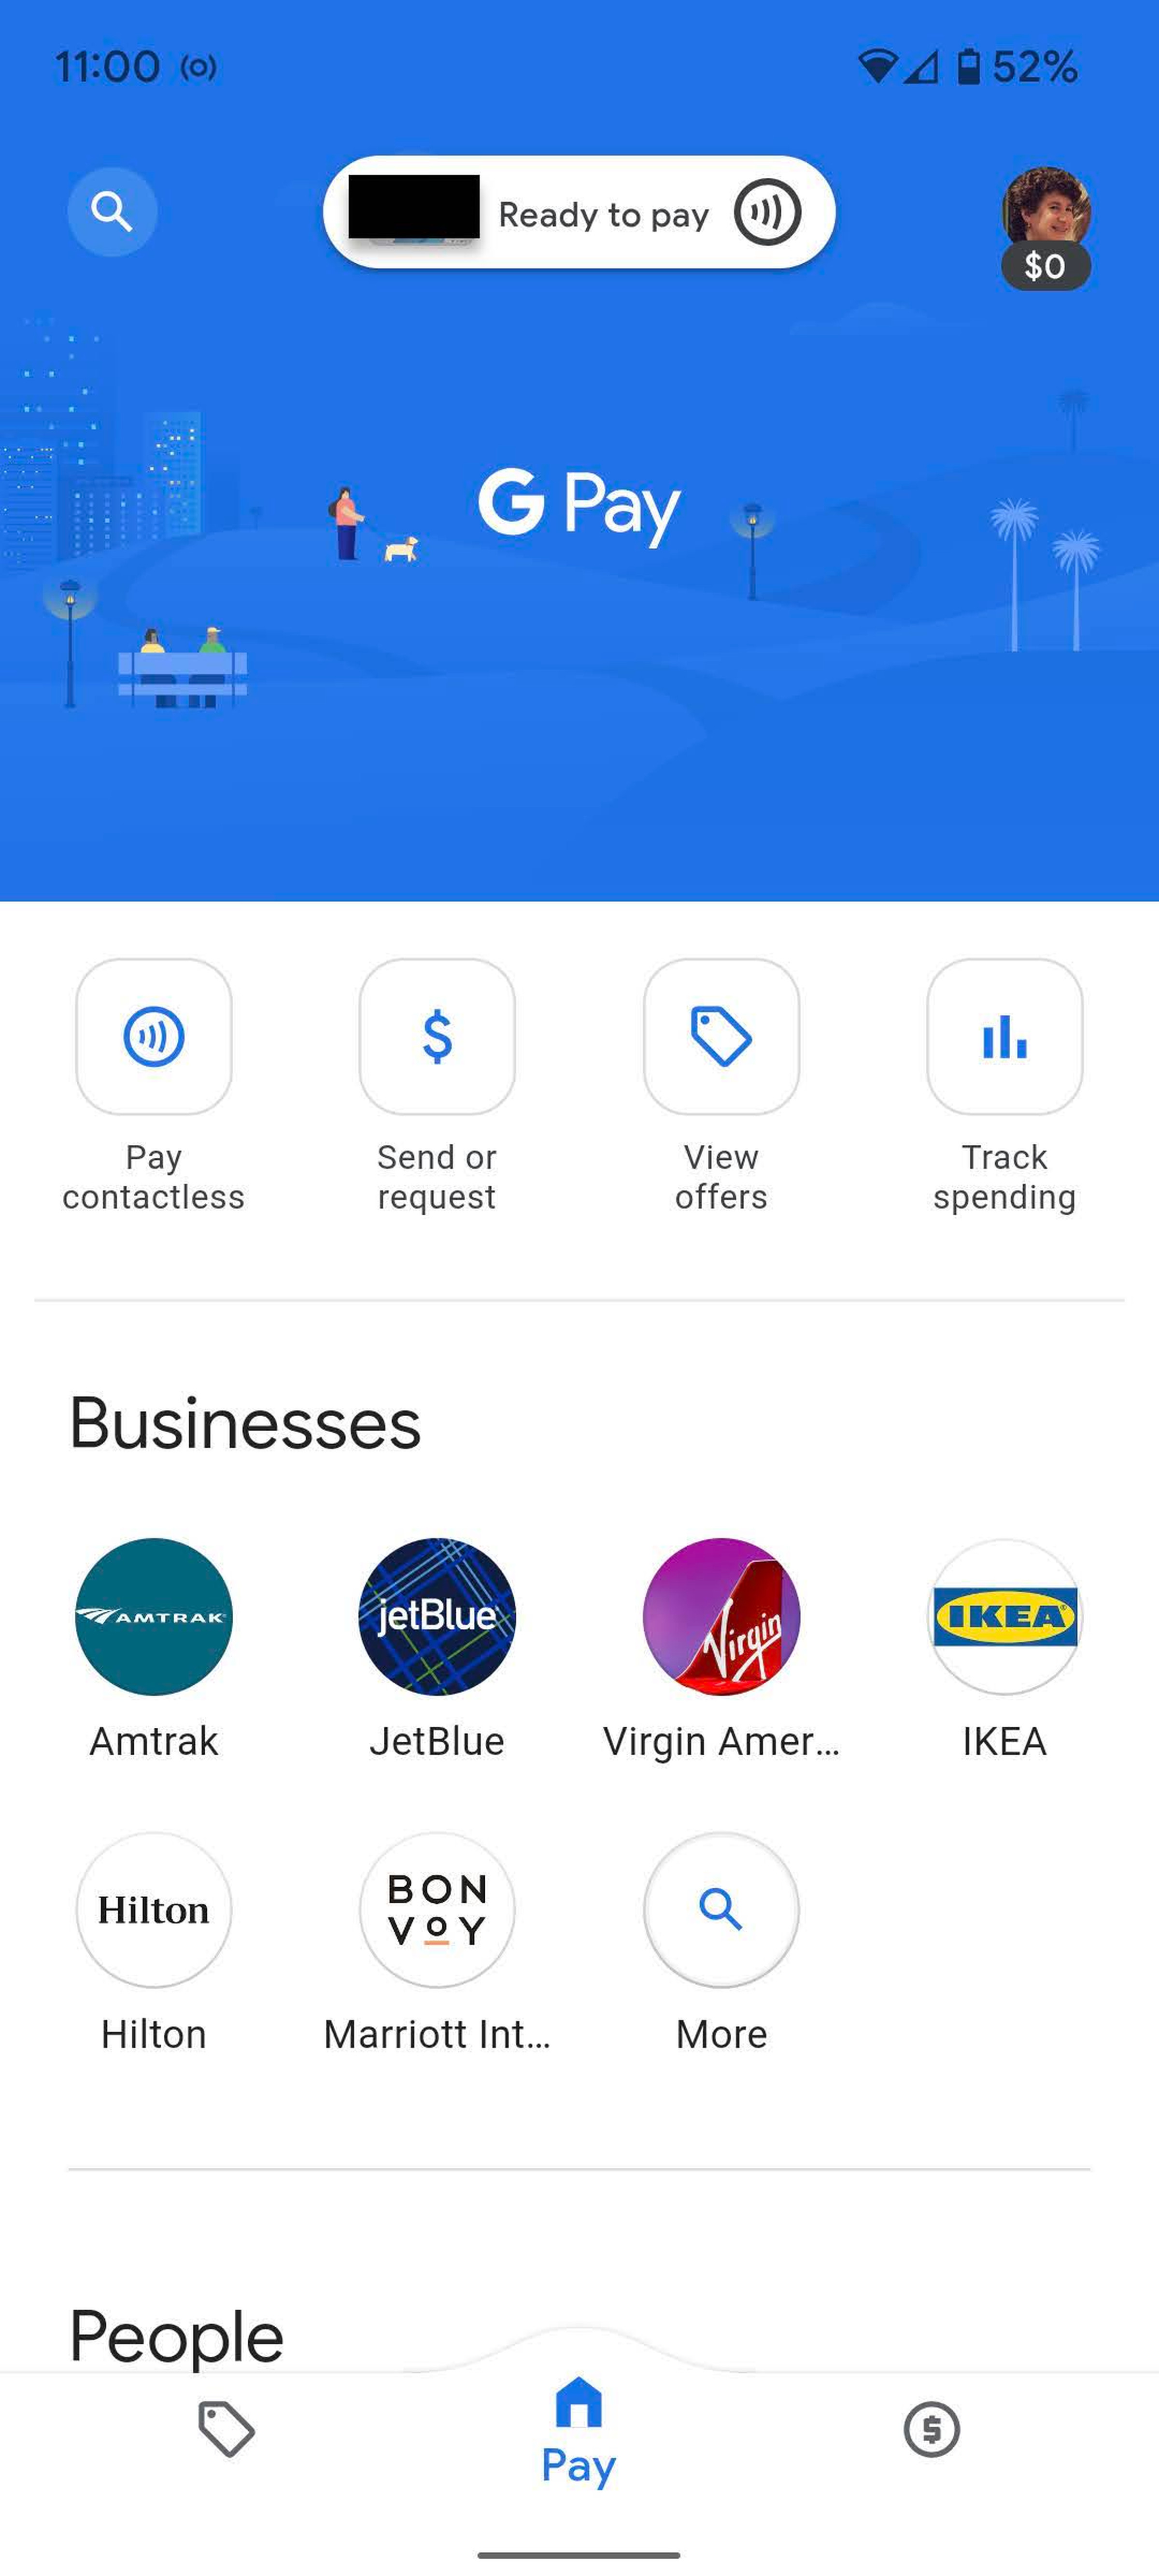 The home screen of the Google Pay app.